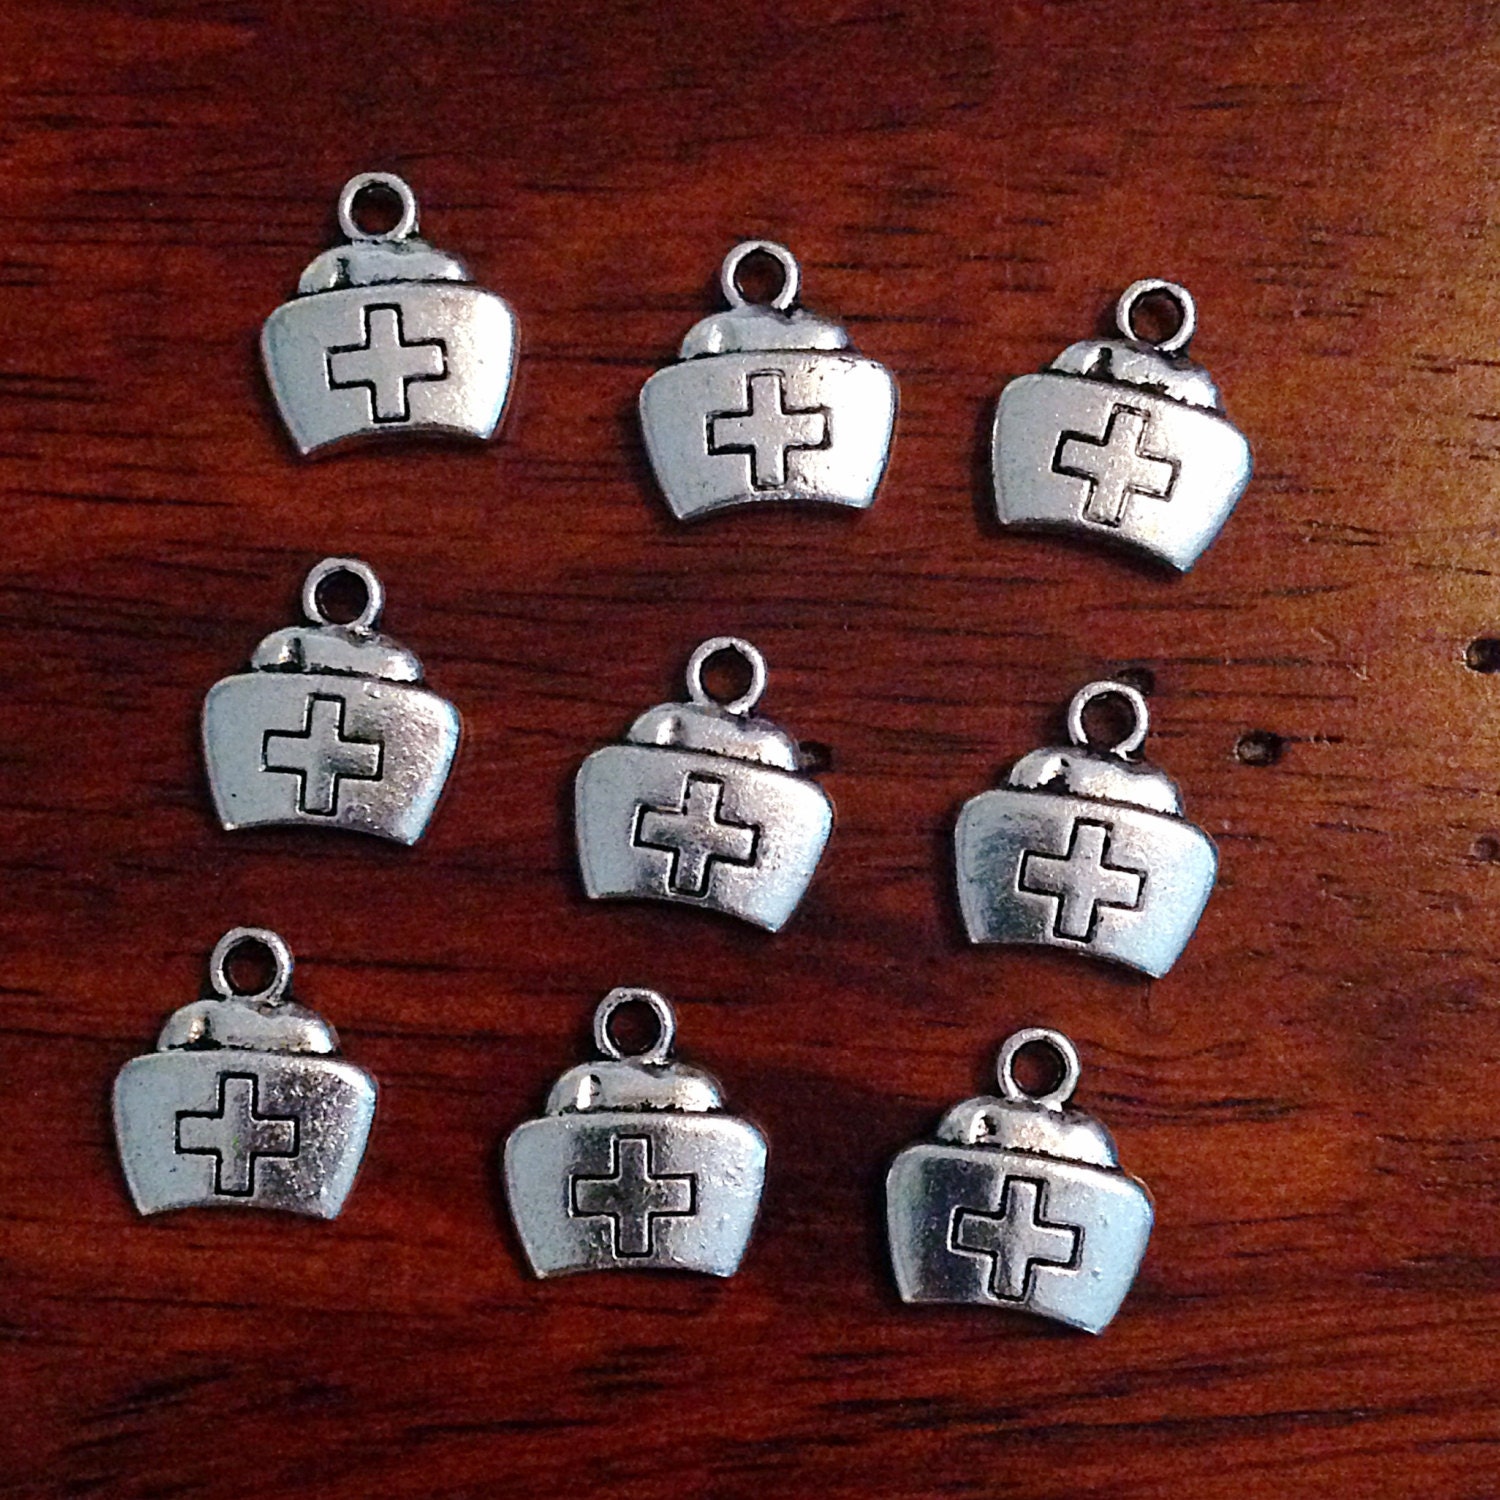 15 Nurse Charms Antique Silver Charms Medical Charms Doctor - Etsy